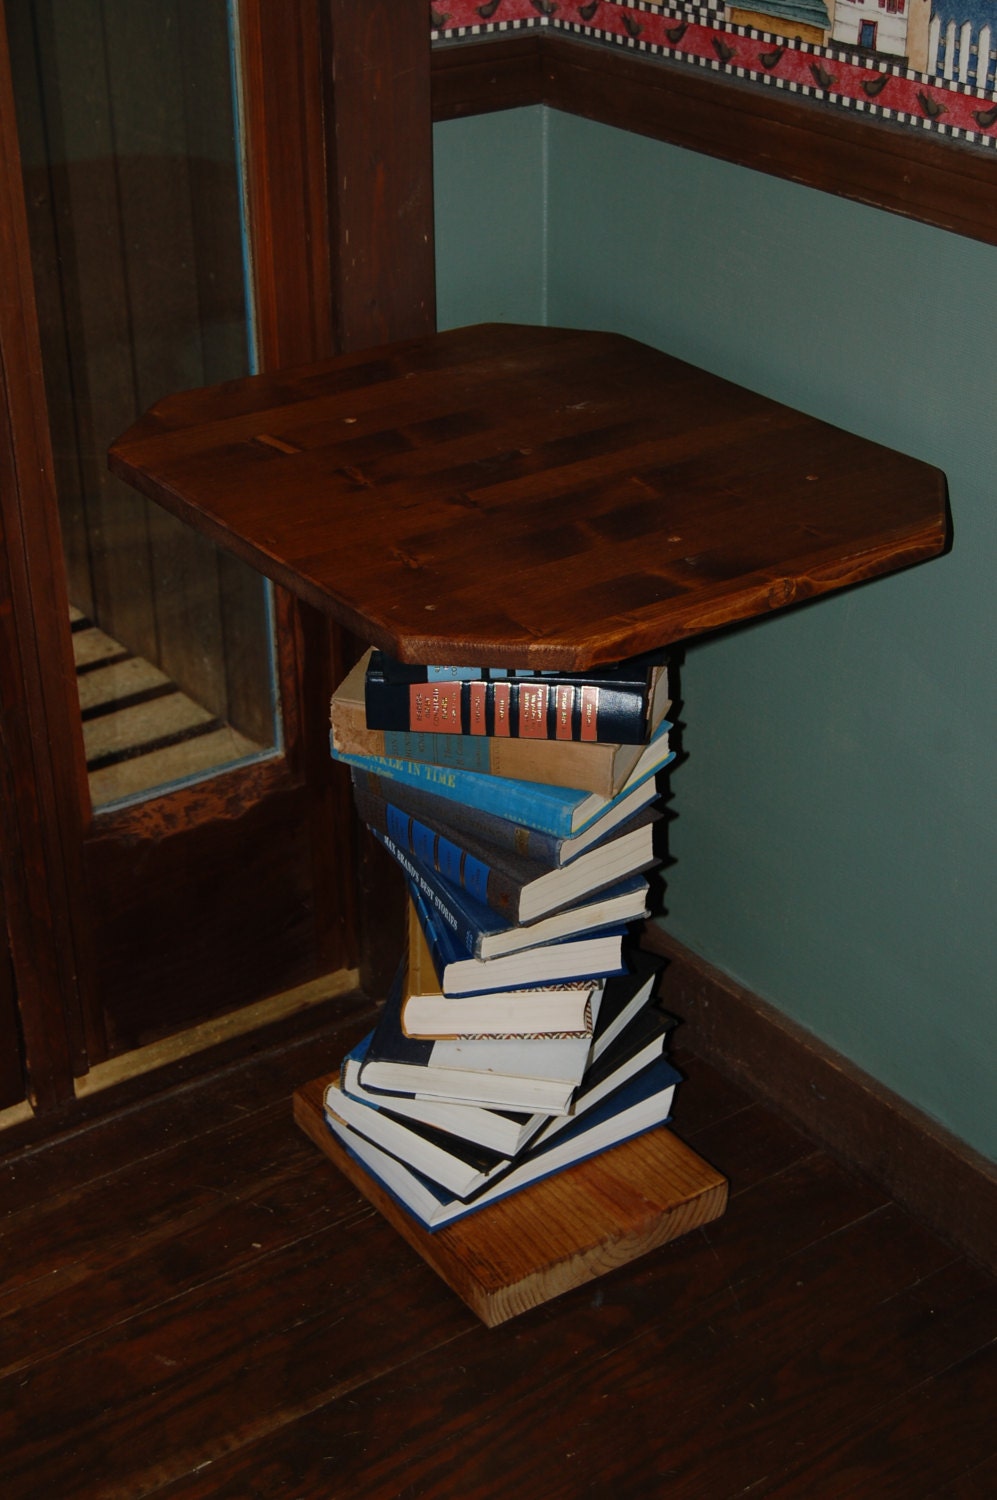 Pine Wood Side Table made with a Spiral of Books Repurposed